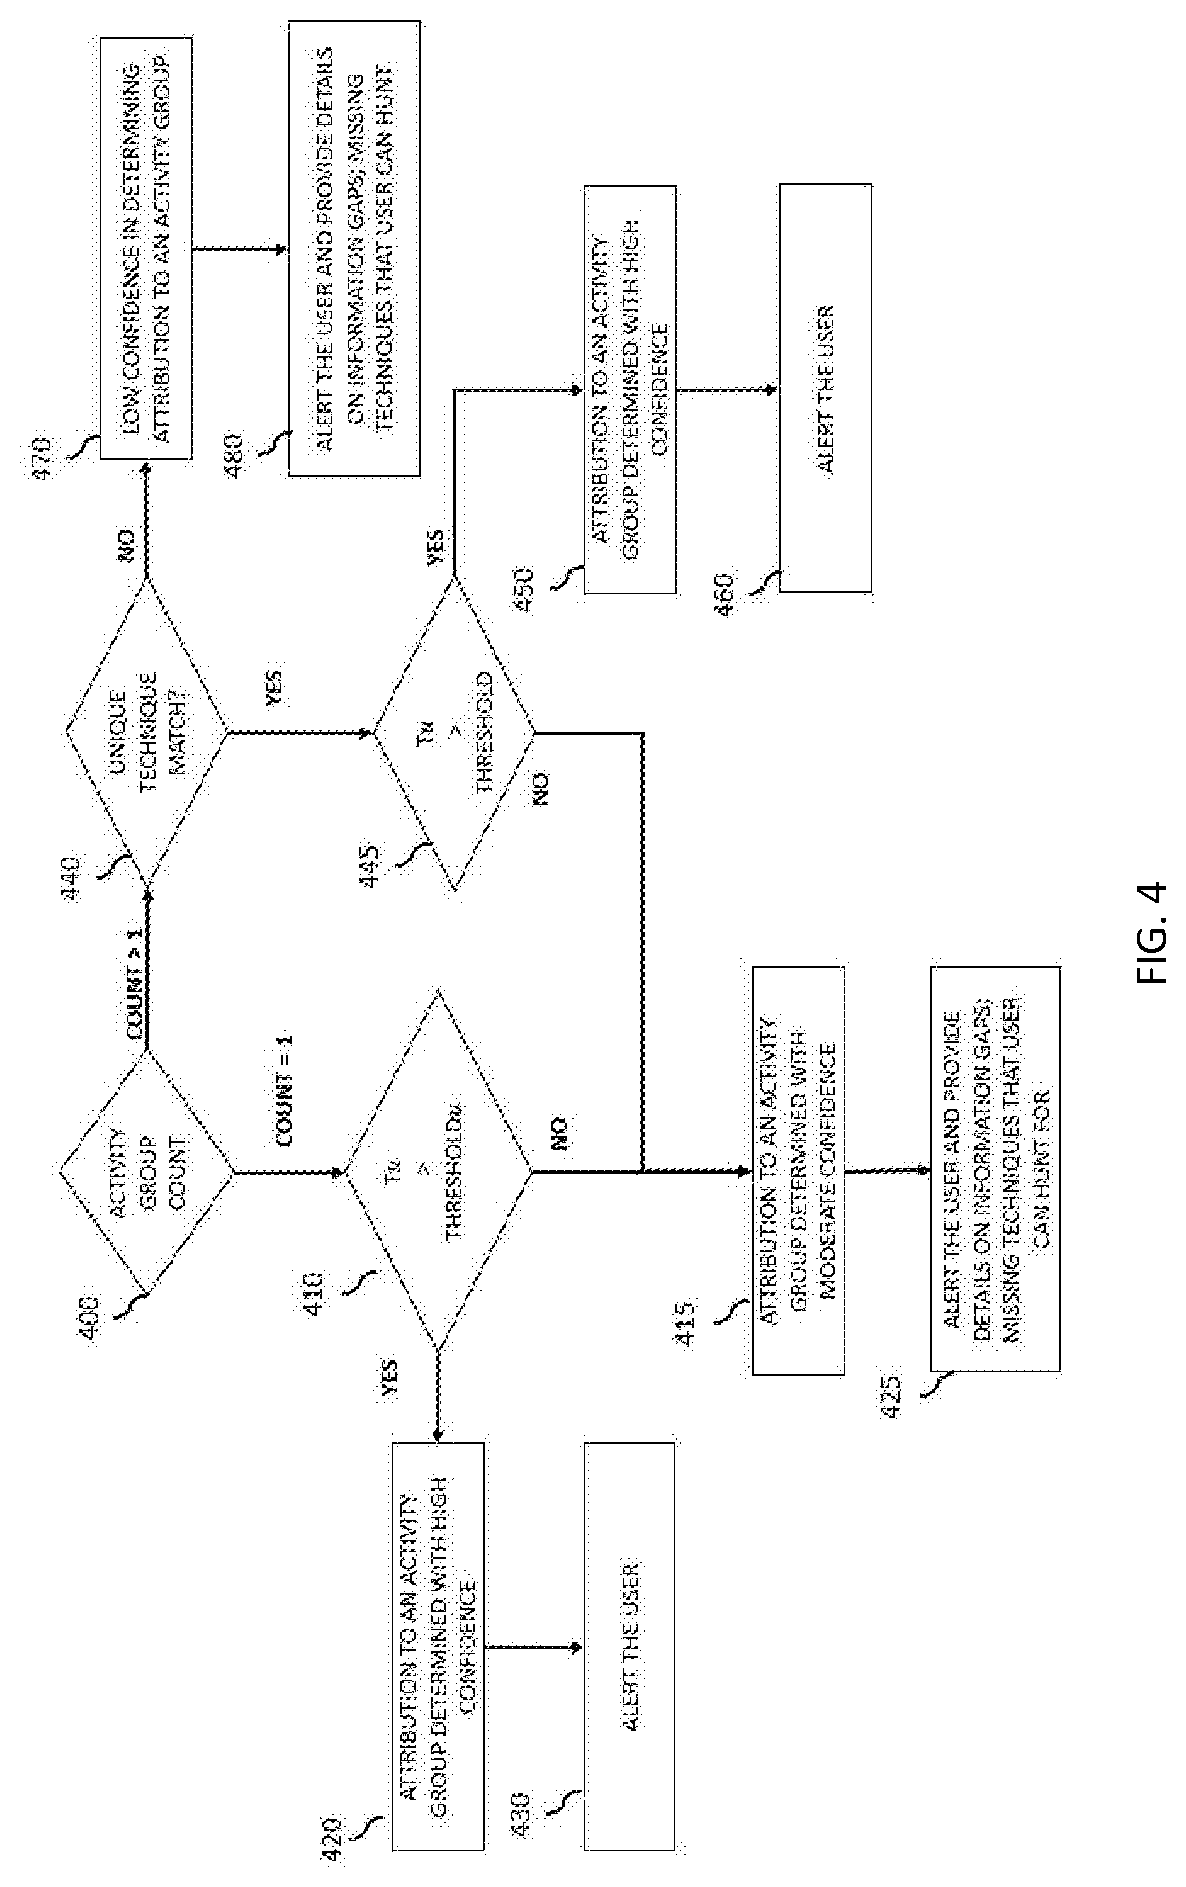 System and method for determining the confidence level in attributing a cyber campaign to an activity group